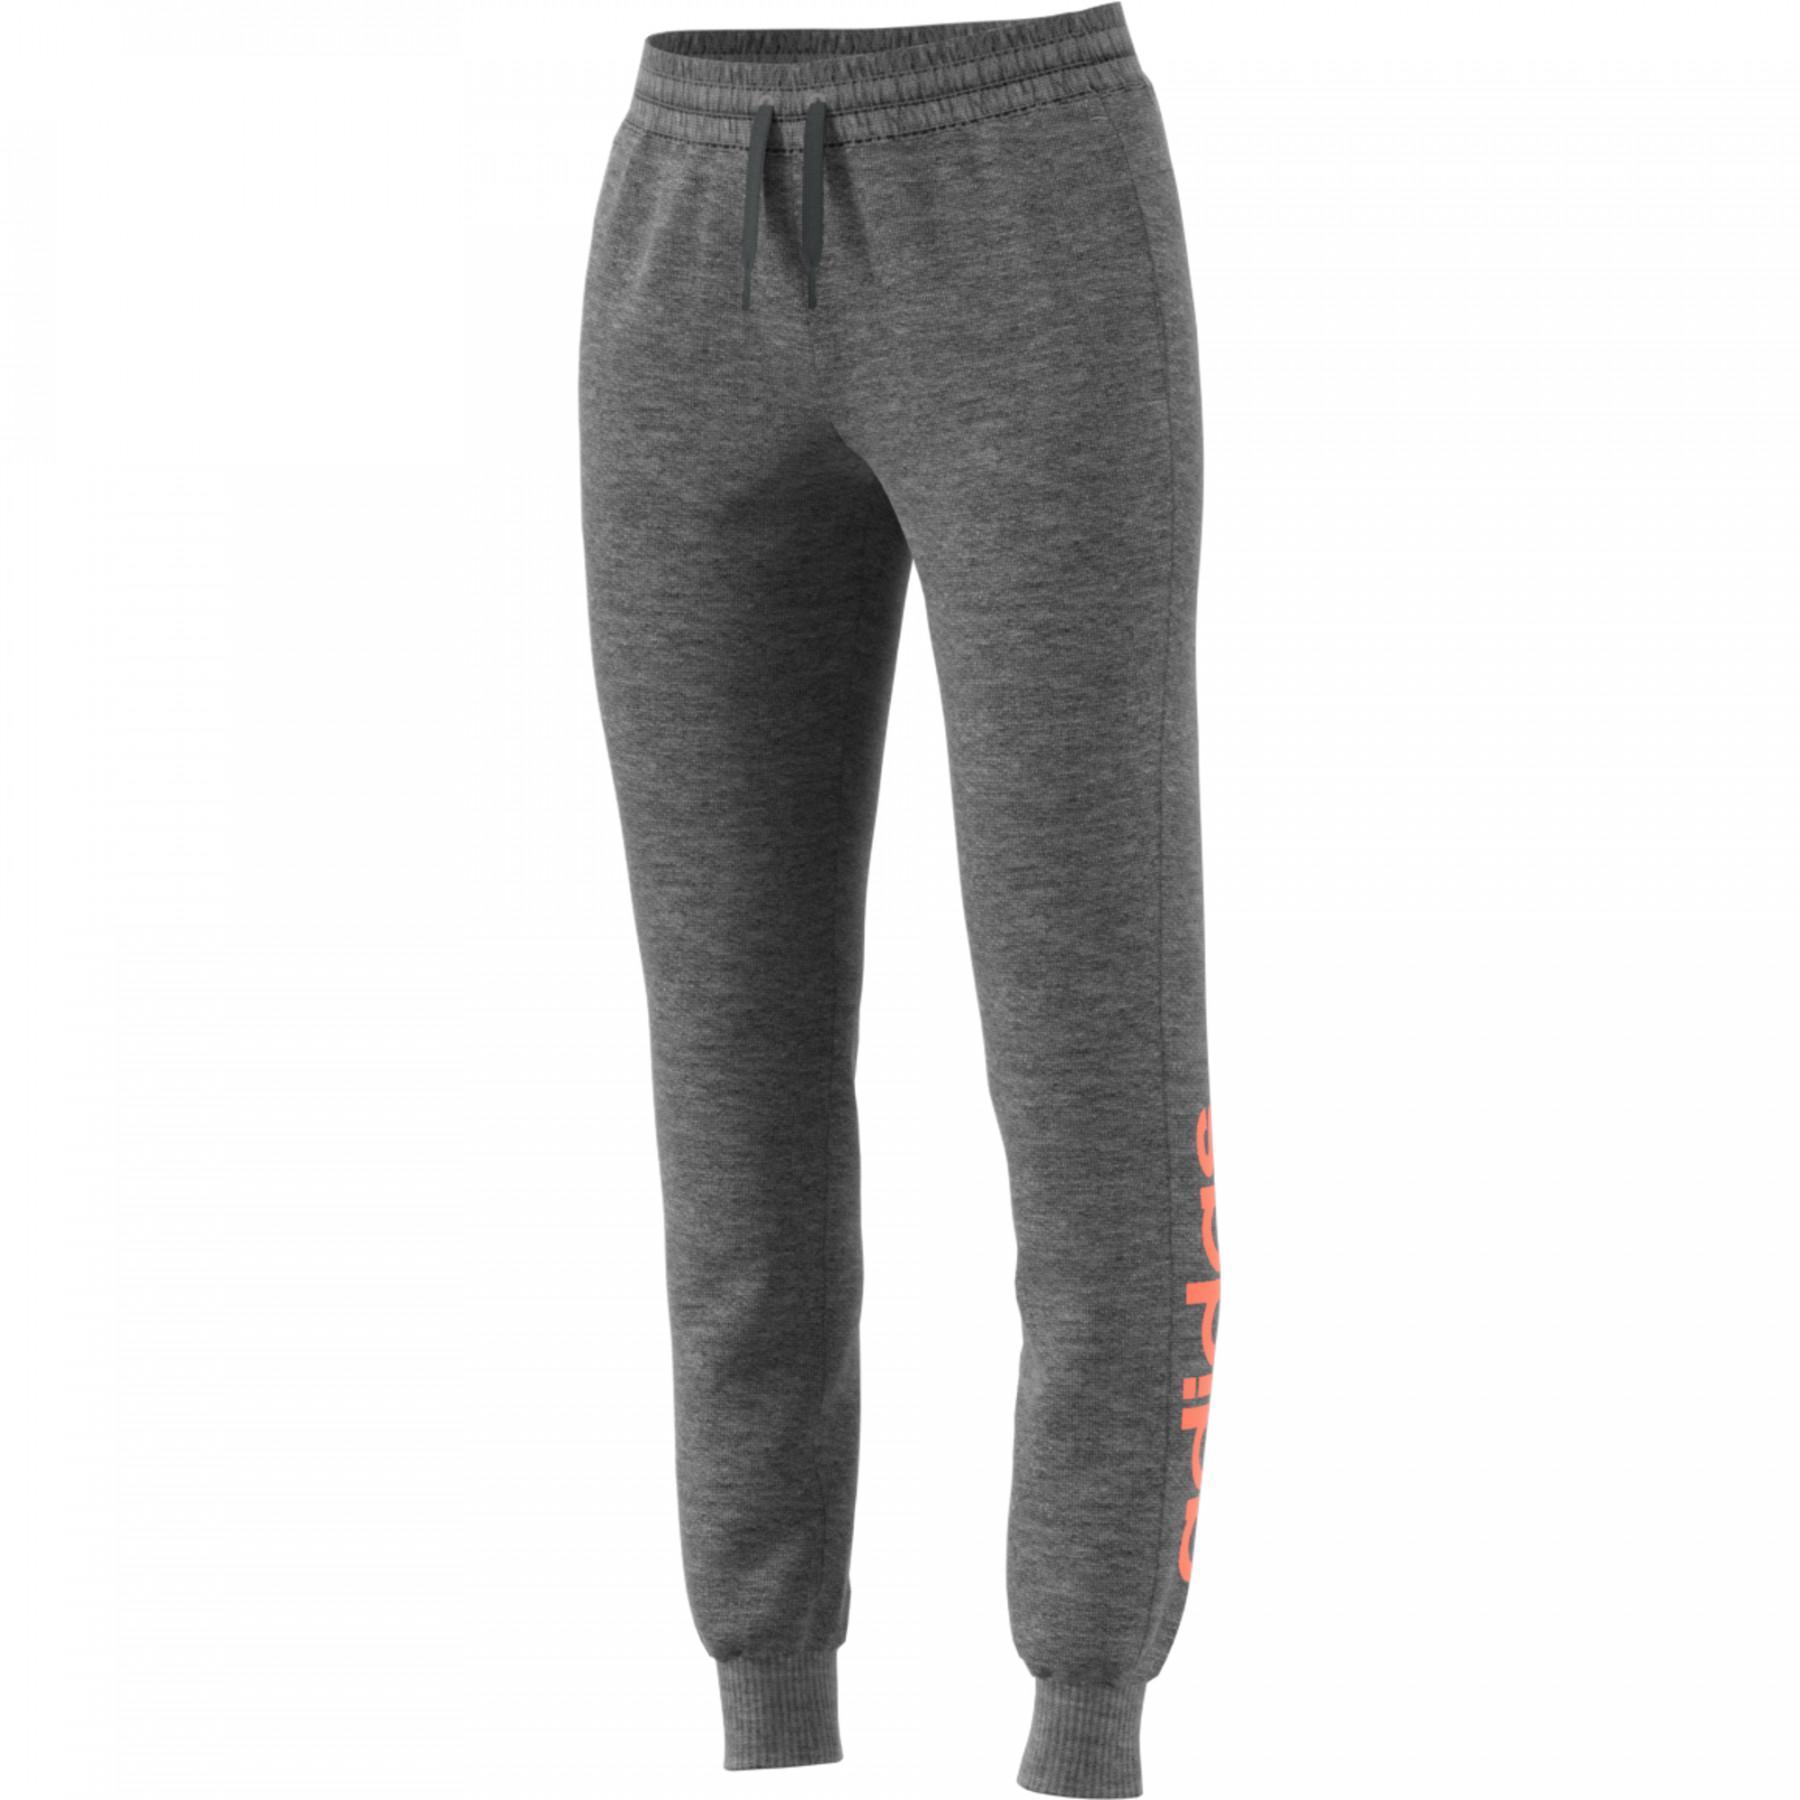 Women's trousers adidas Essentials Linear